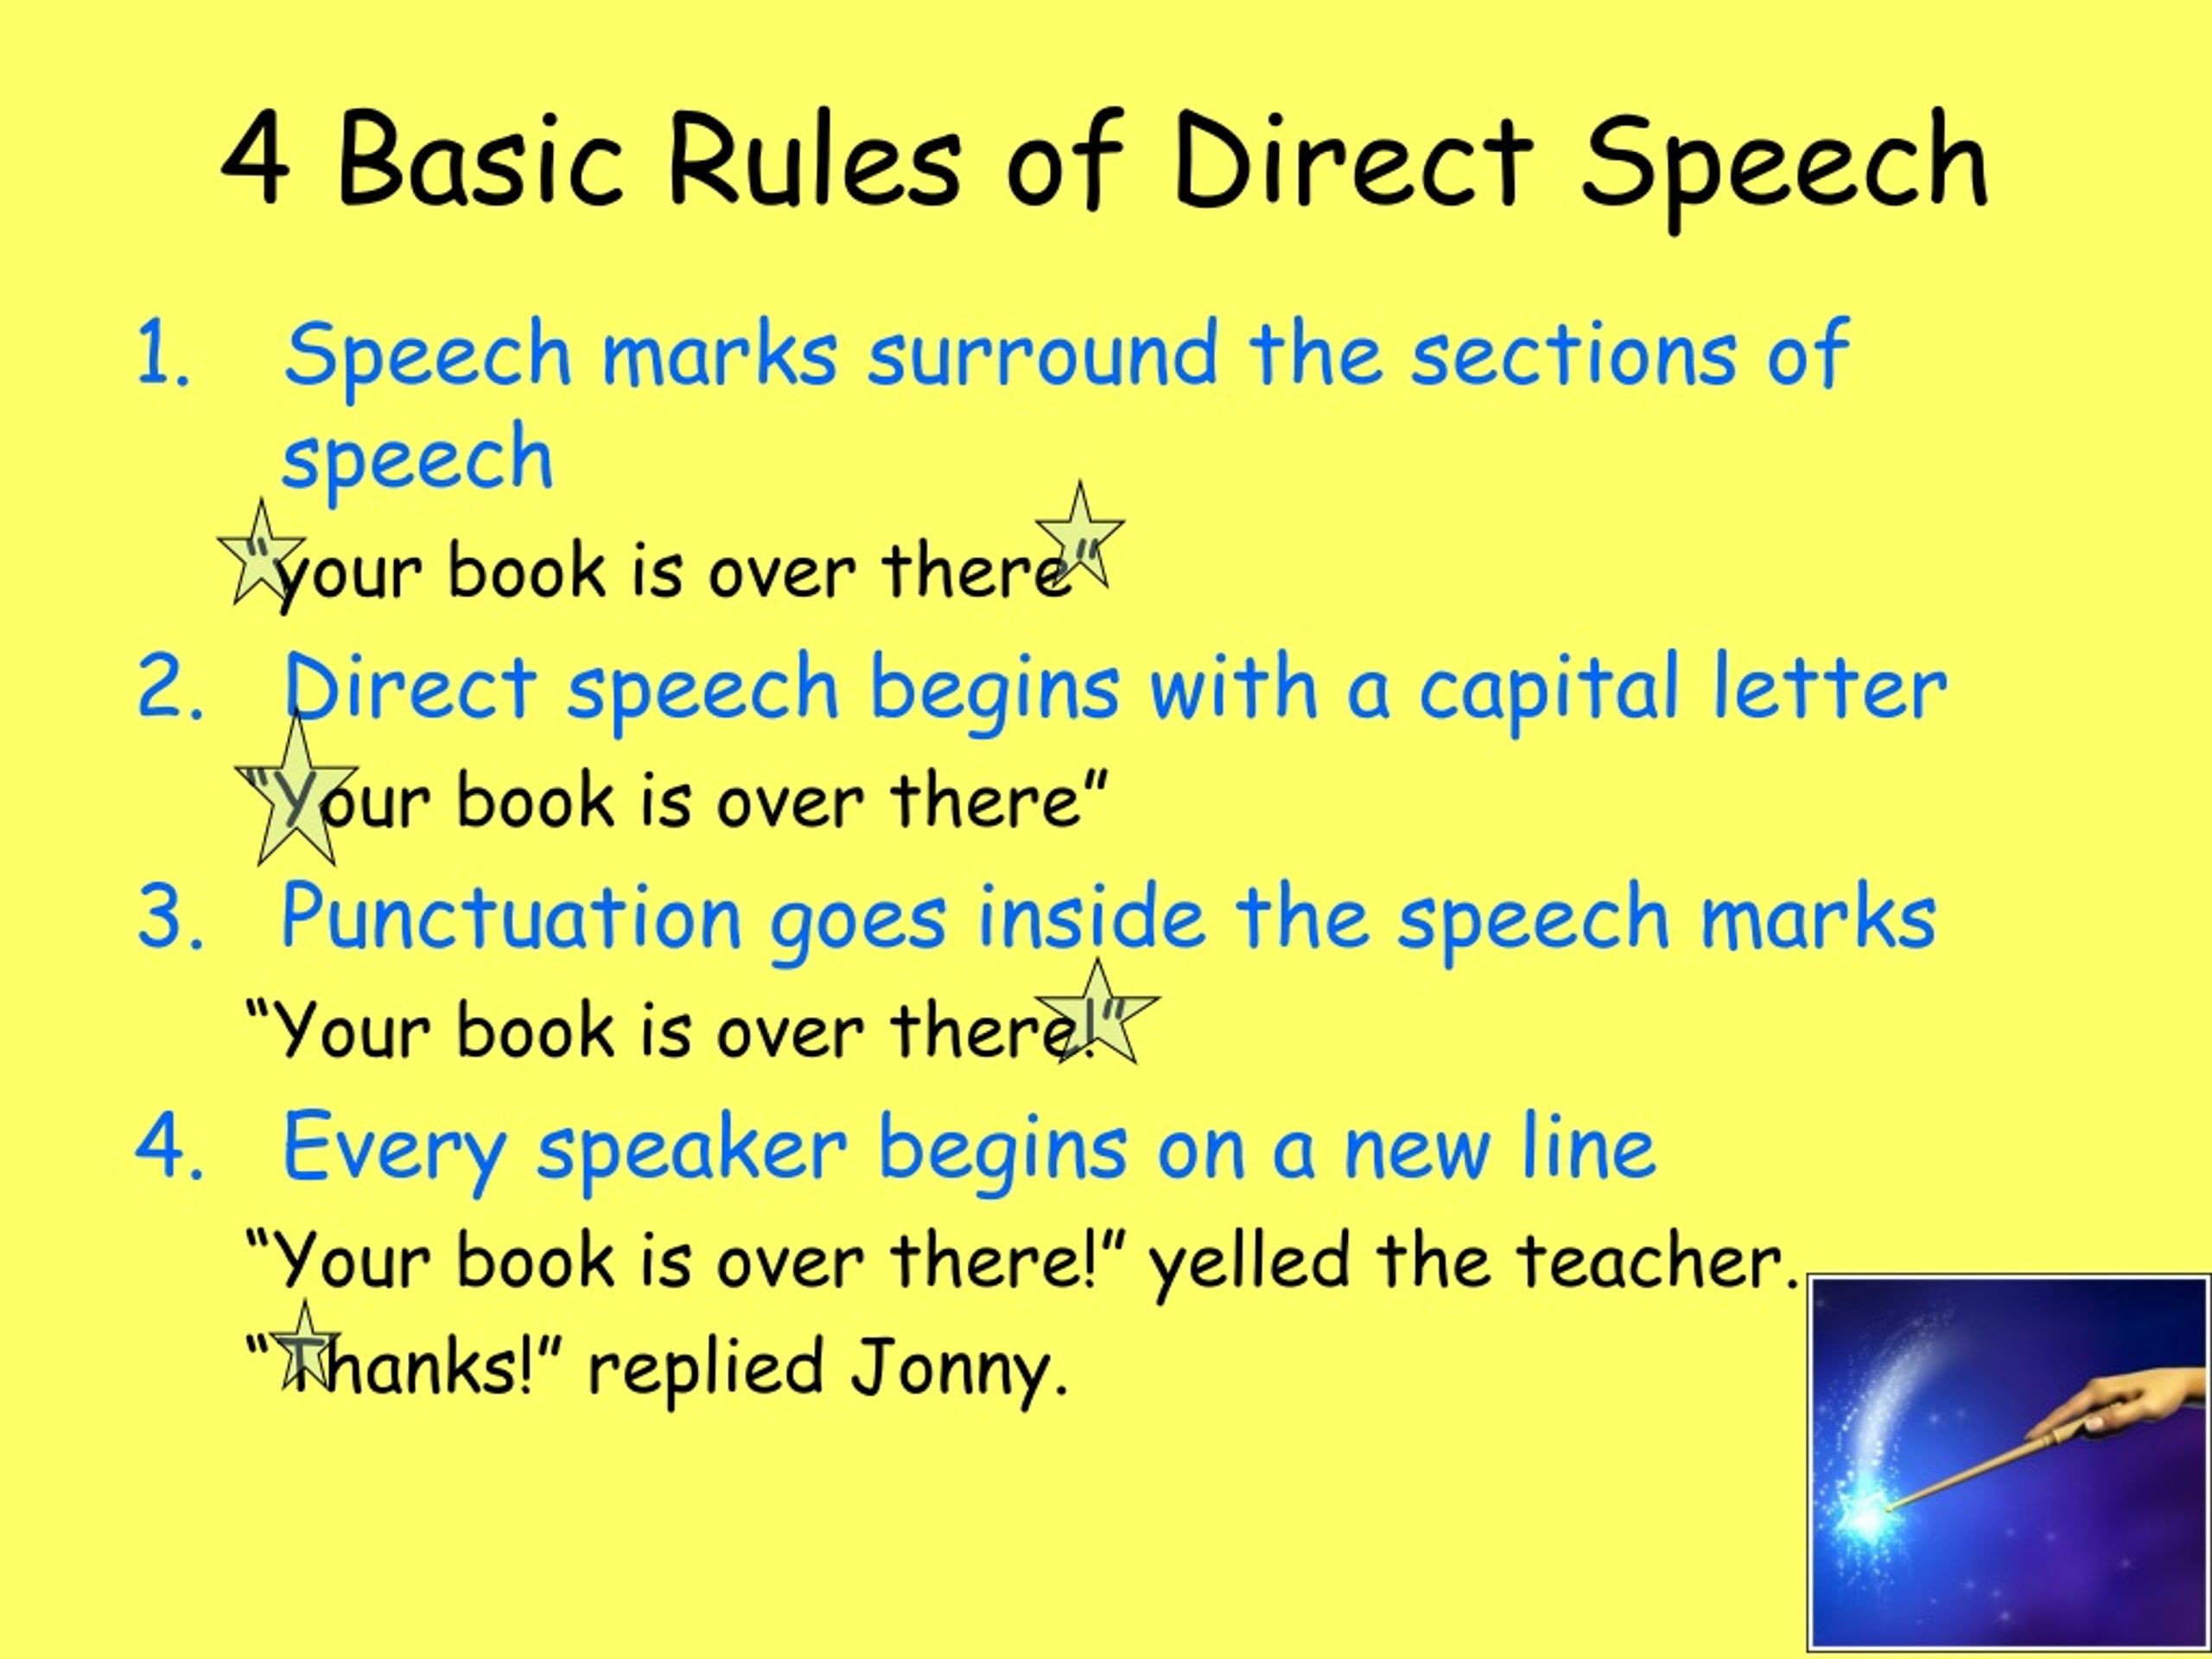 direct speech rules examples